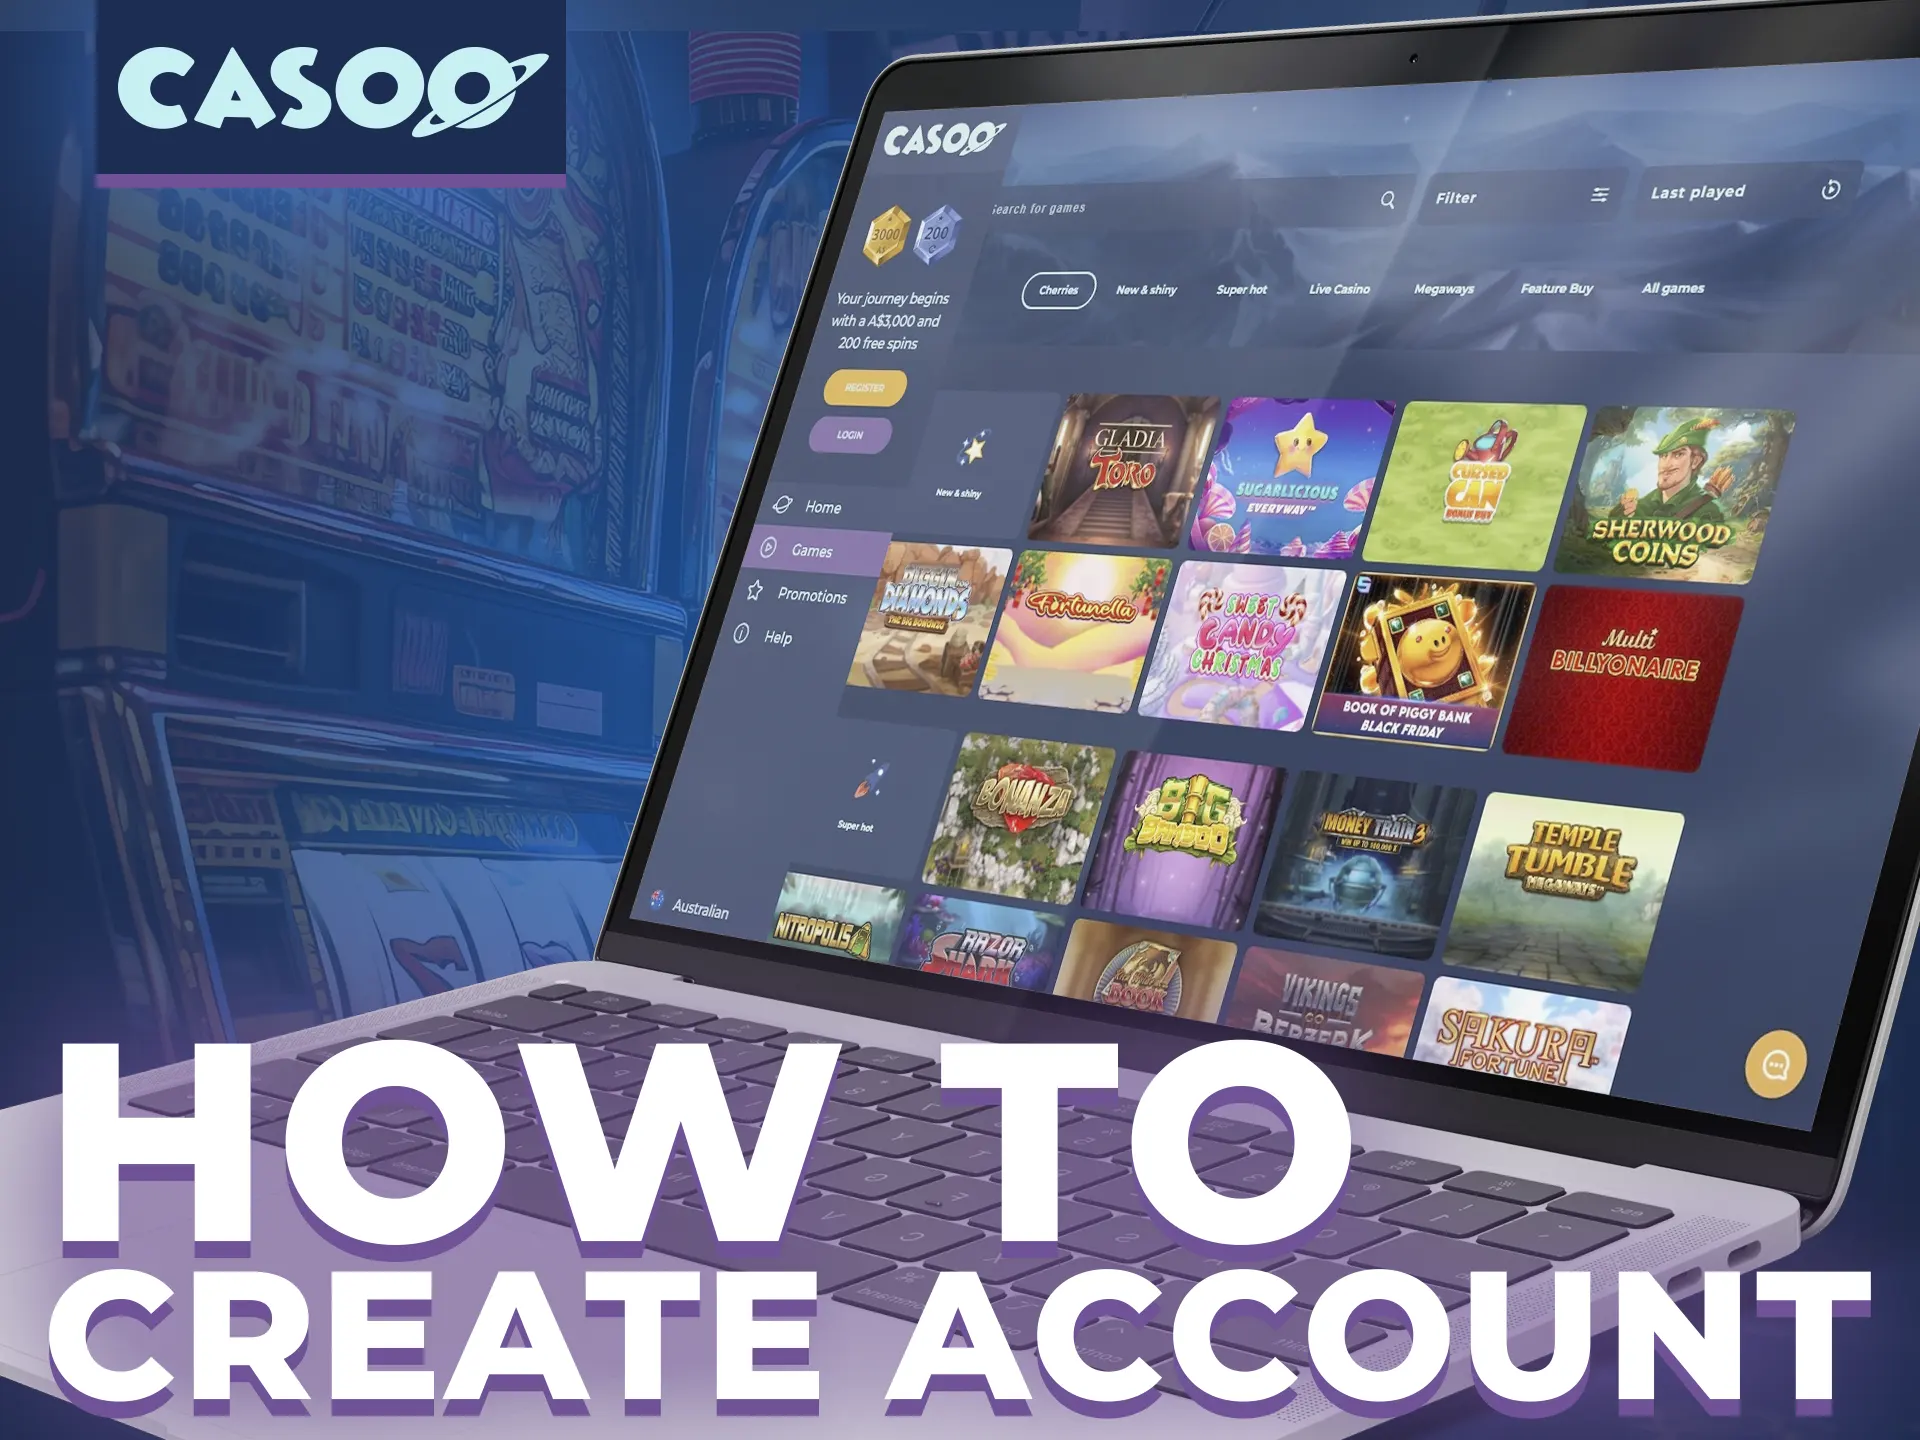 There is an instruction how to create account at Casoo online casino.